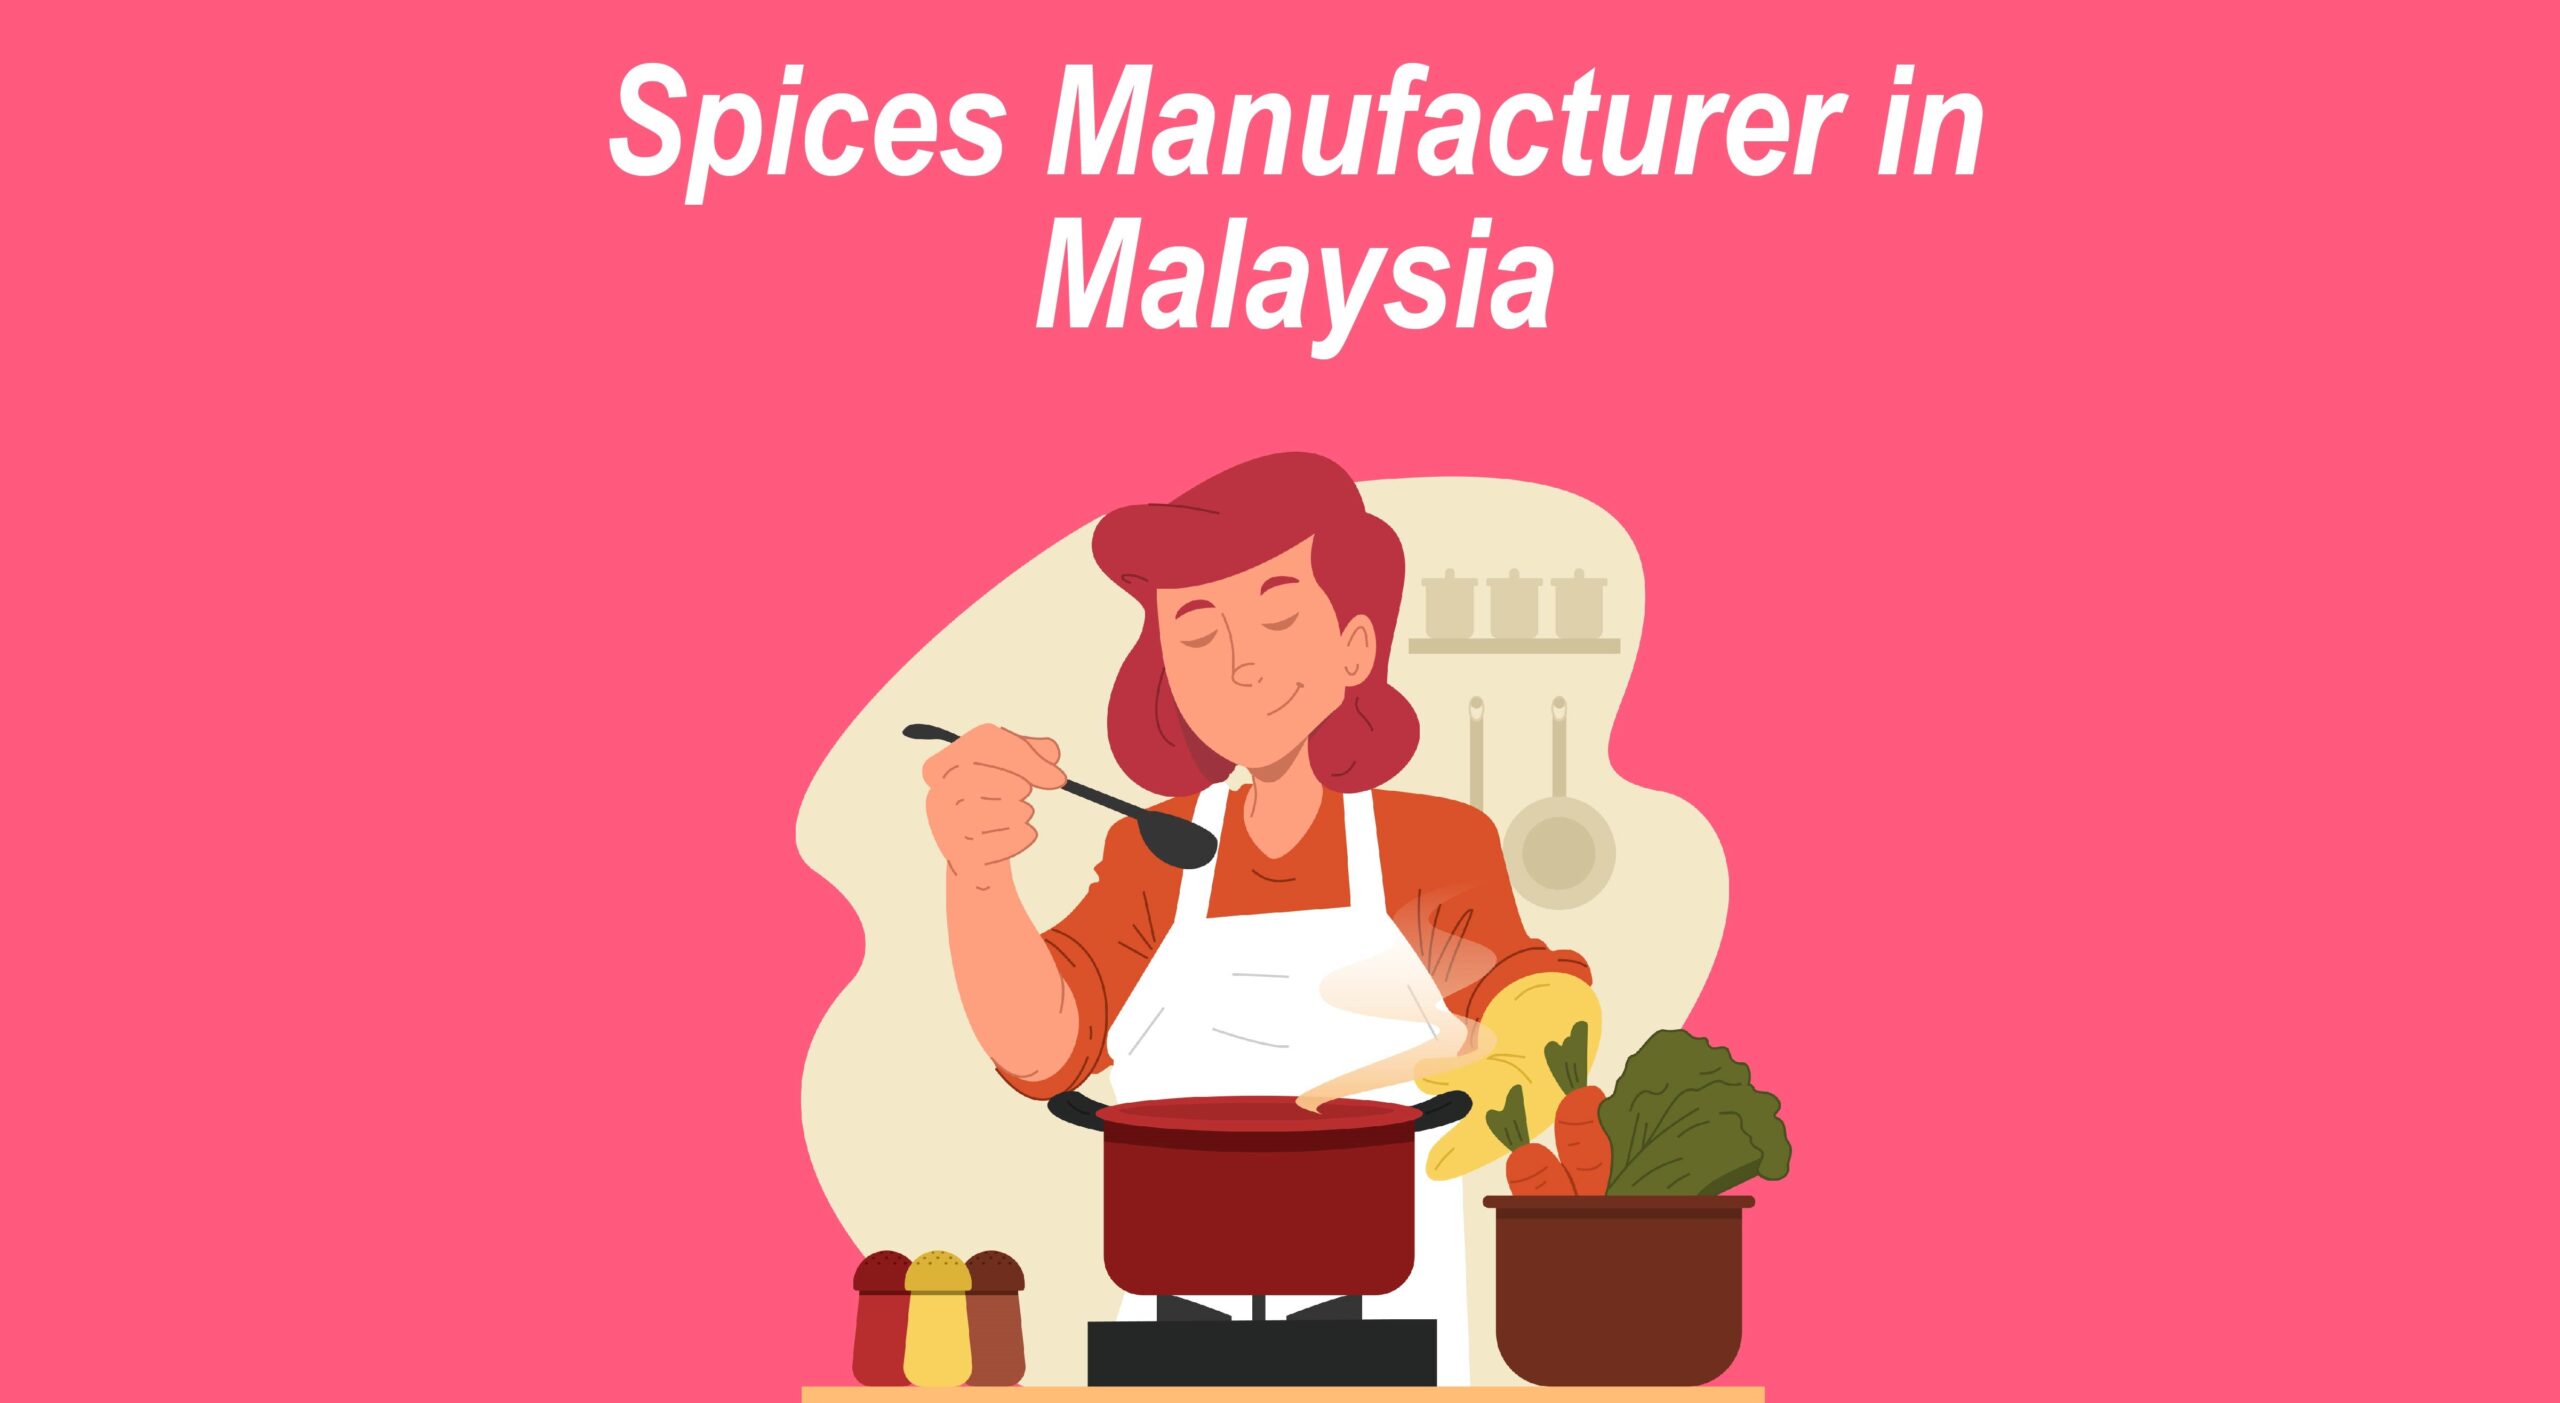 Spices Manufacturer in Malaysia